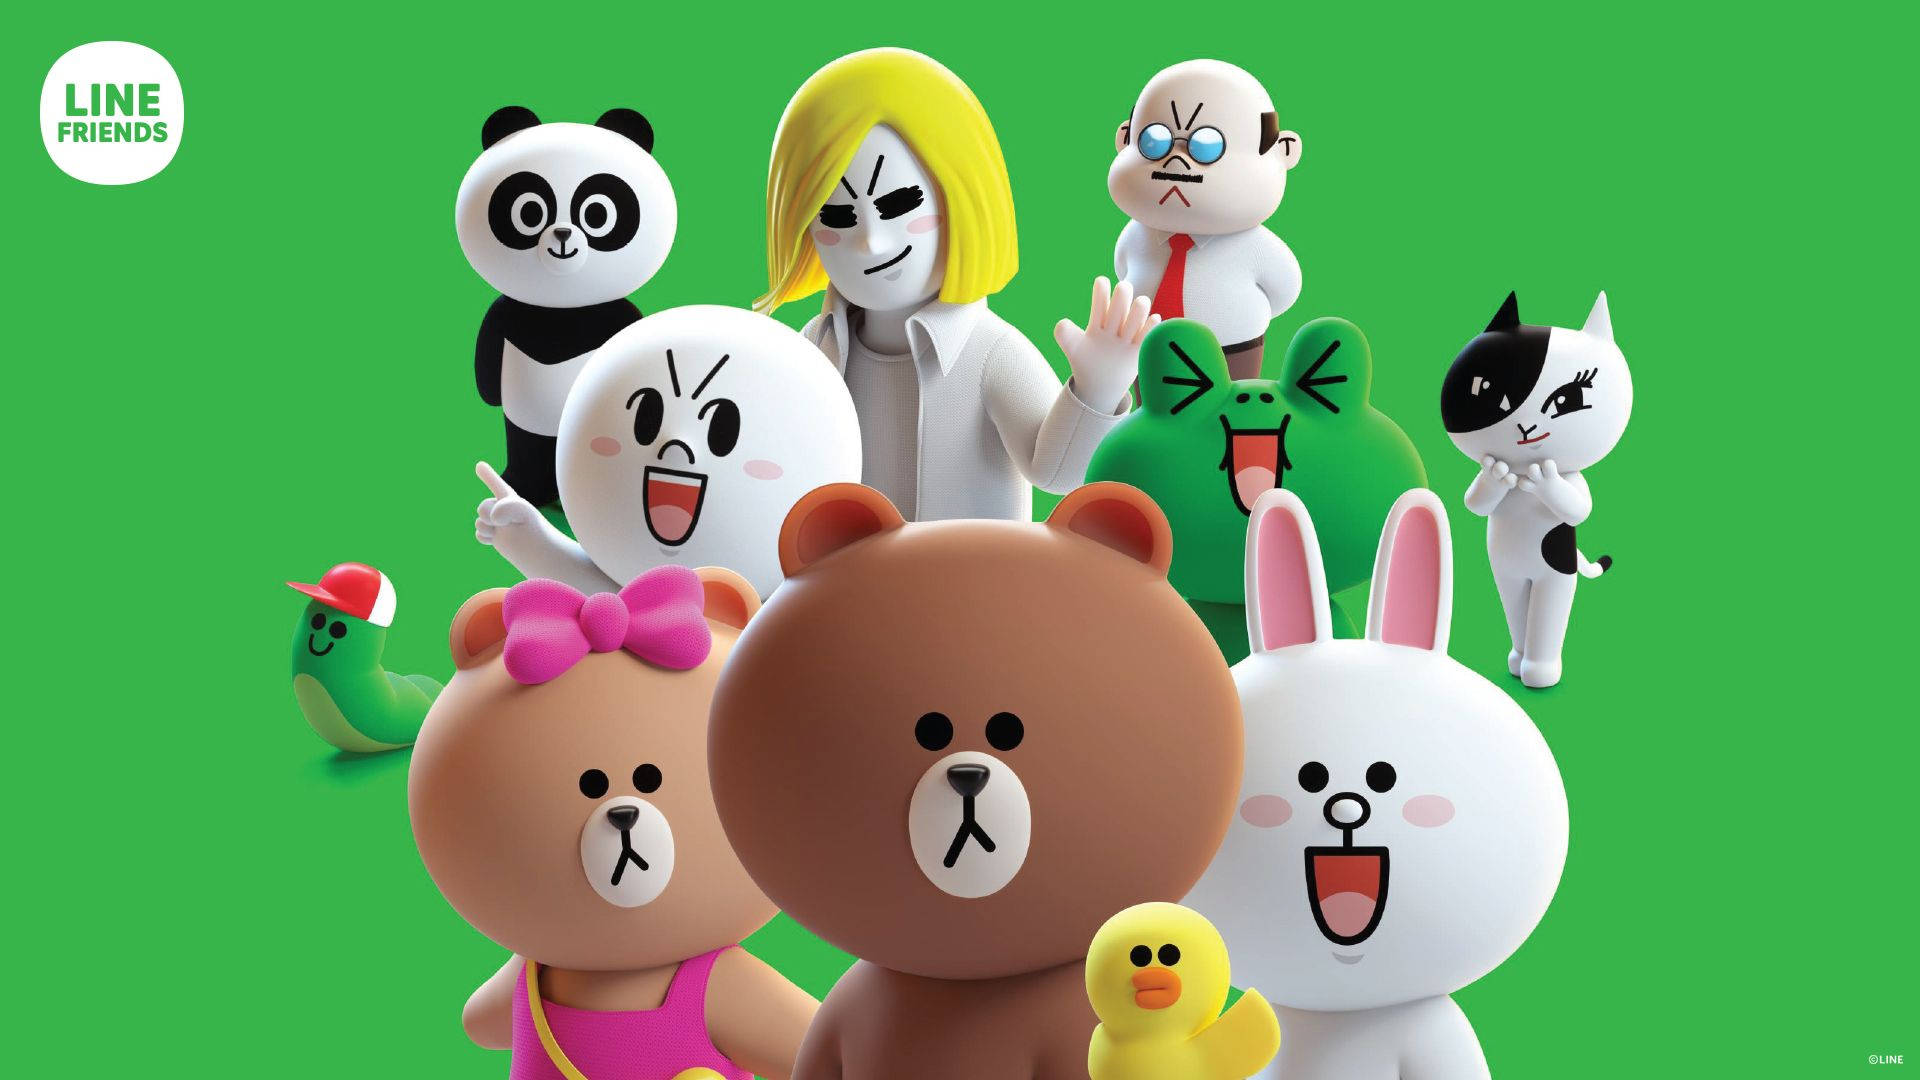 Playful Gathering of LINE FRIENDS Characters Wallpaper